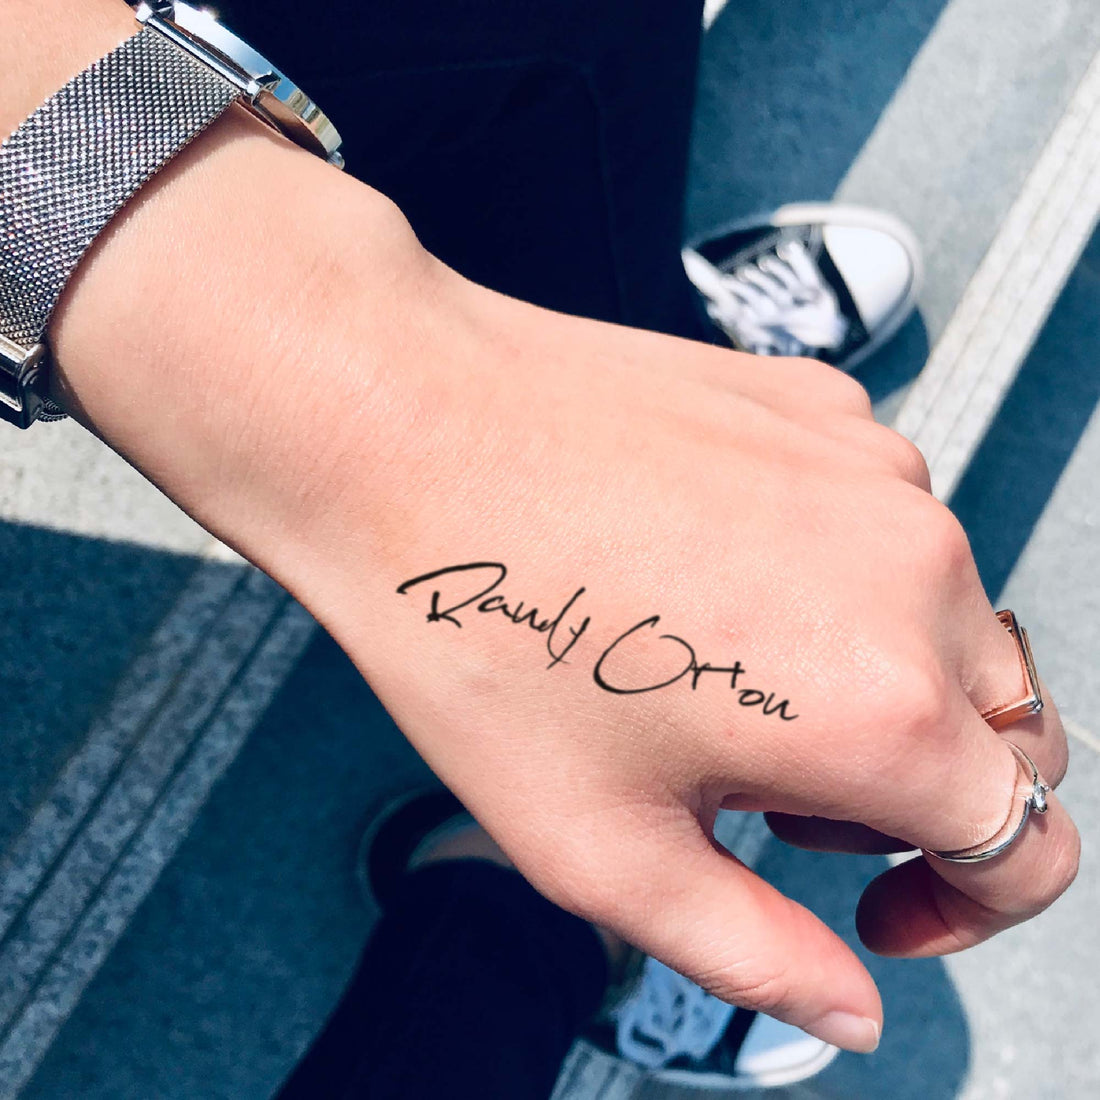 Randy Orton custom temporary tattoo sticker design idea inspiration meanings removal arm wrist hand words font name signature calligraphy lyrics tour concert outfits merch accessory gift souvenir costumes wear dress up code